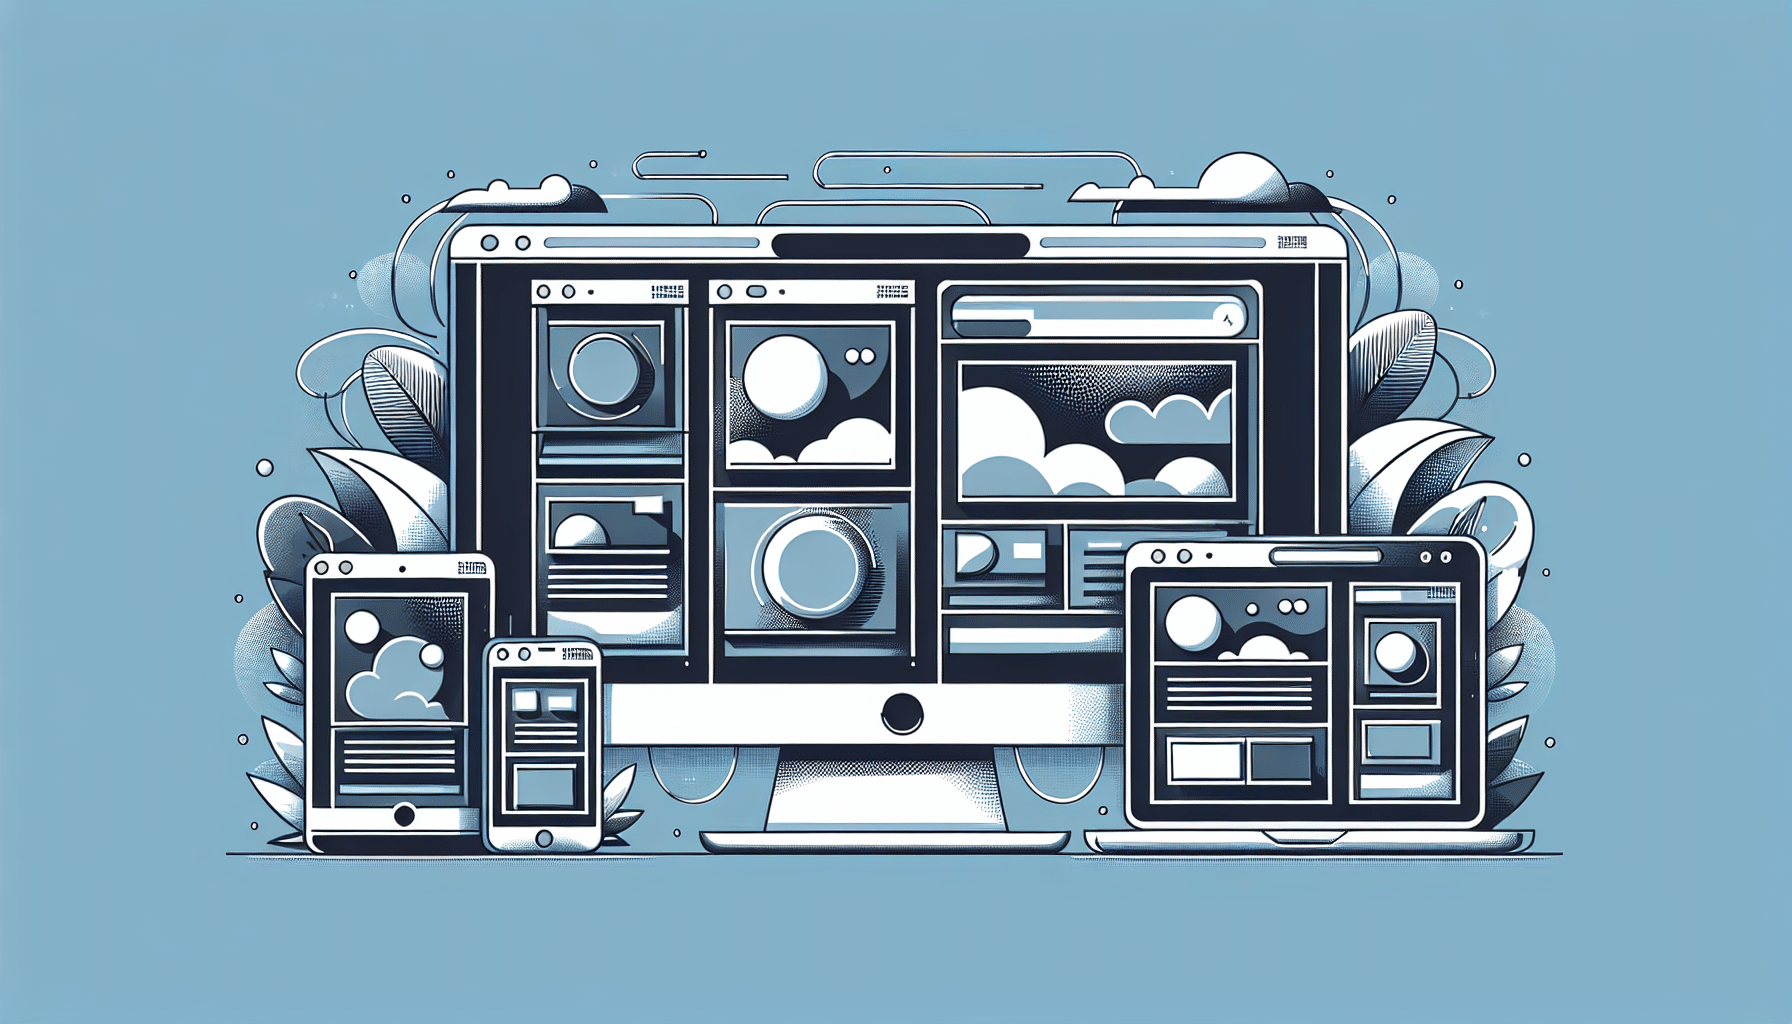 Illustration of responsive web design across multiple devices